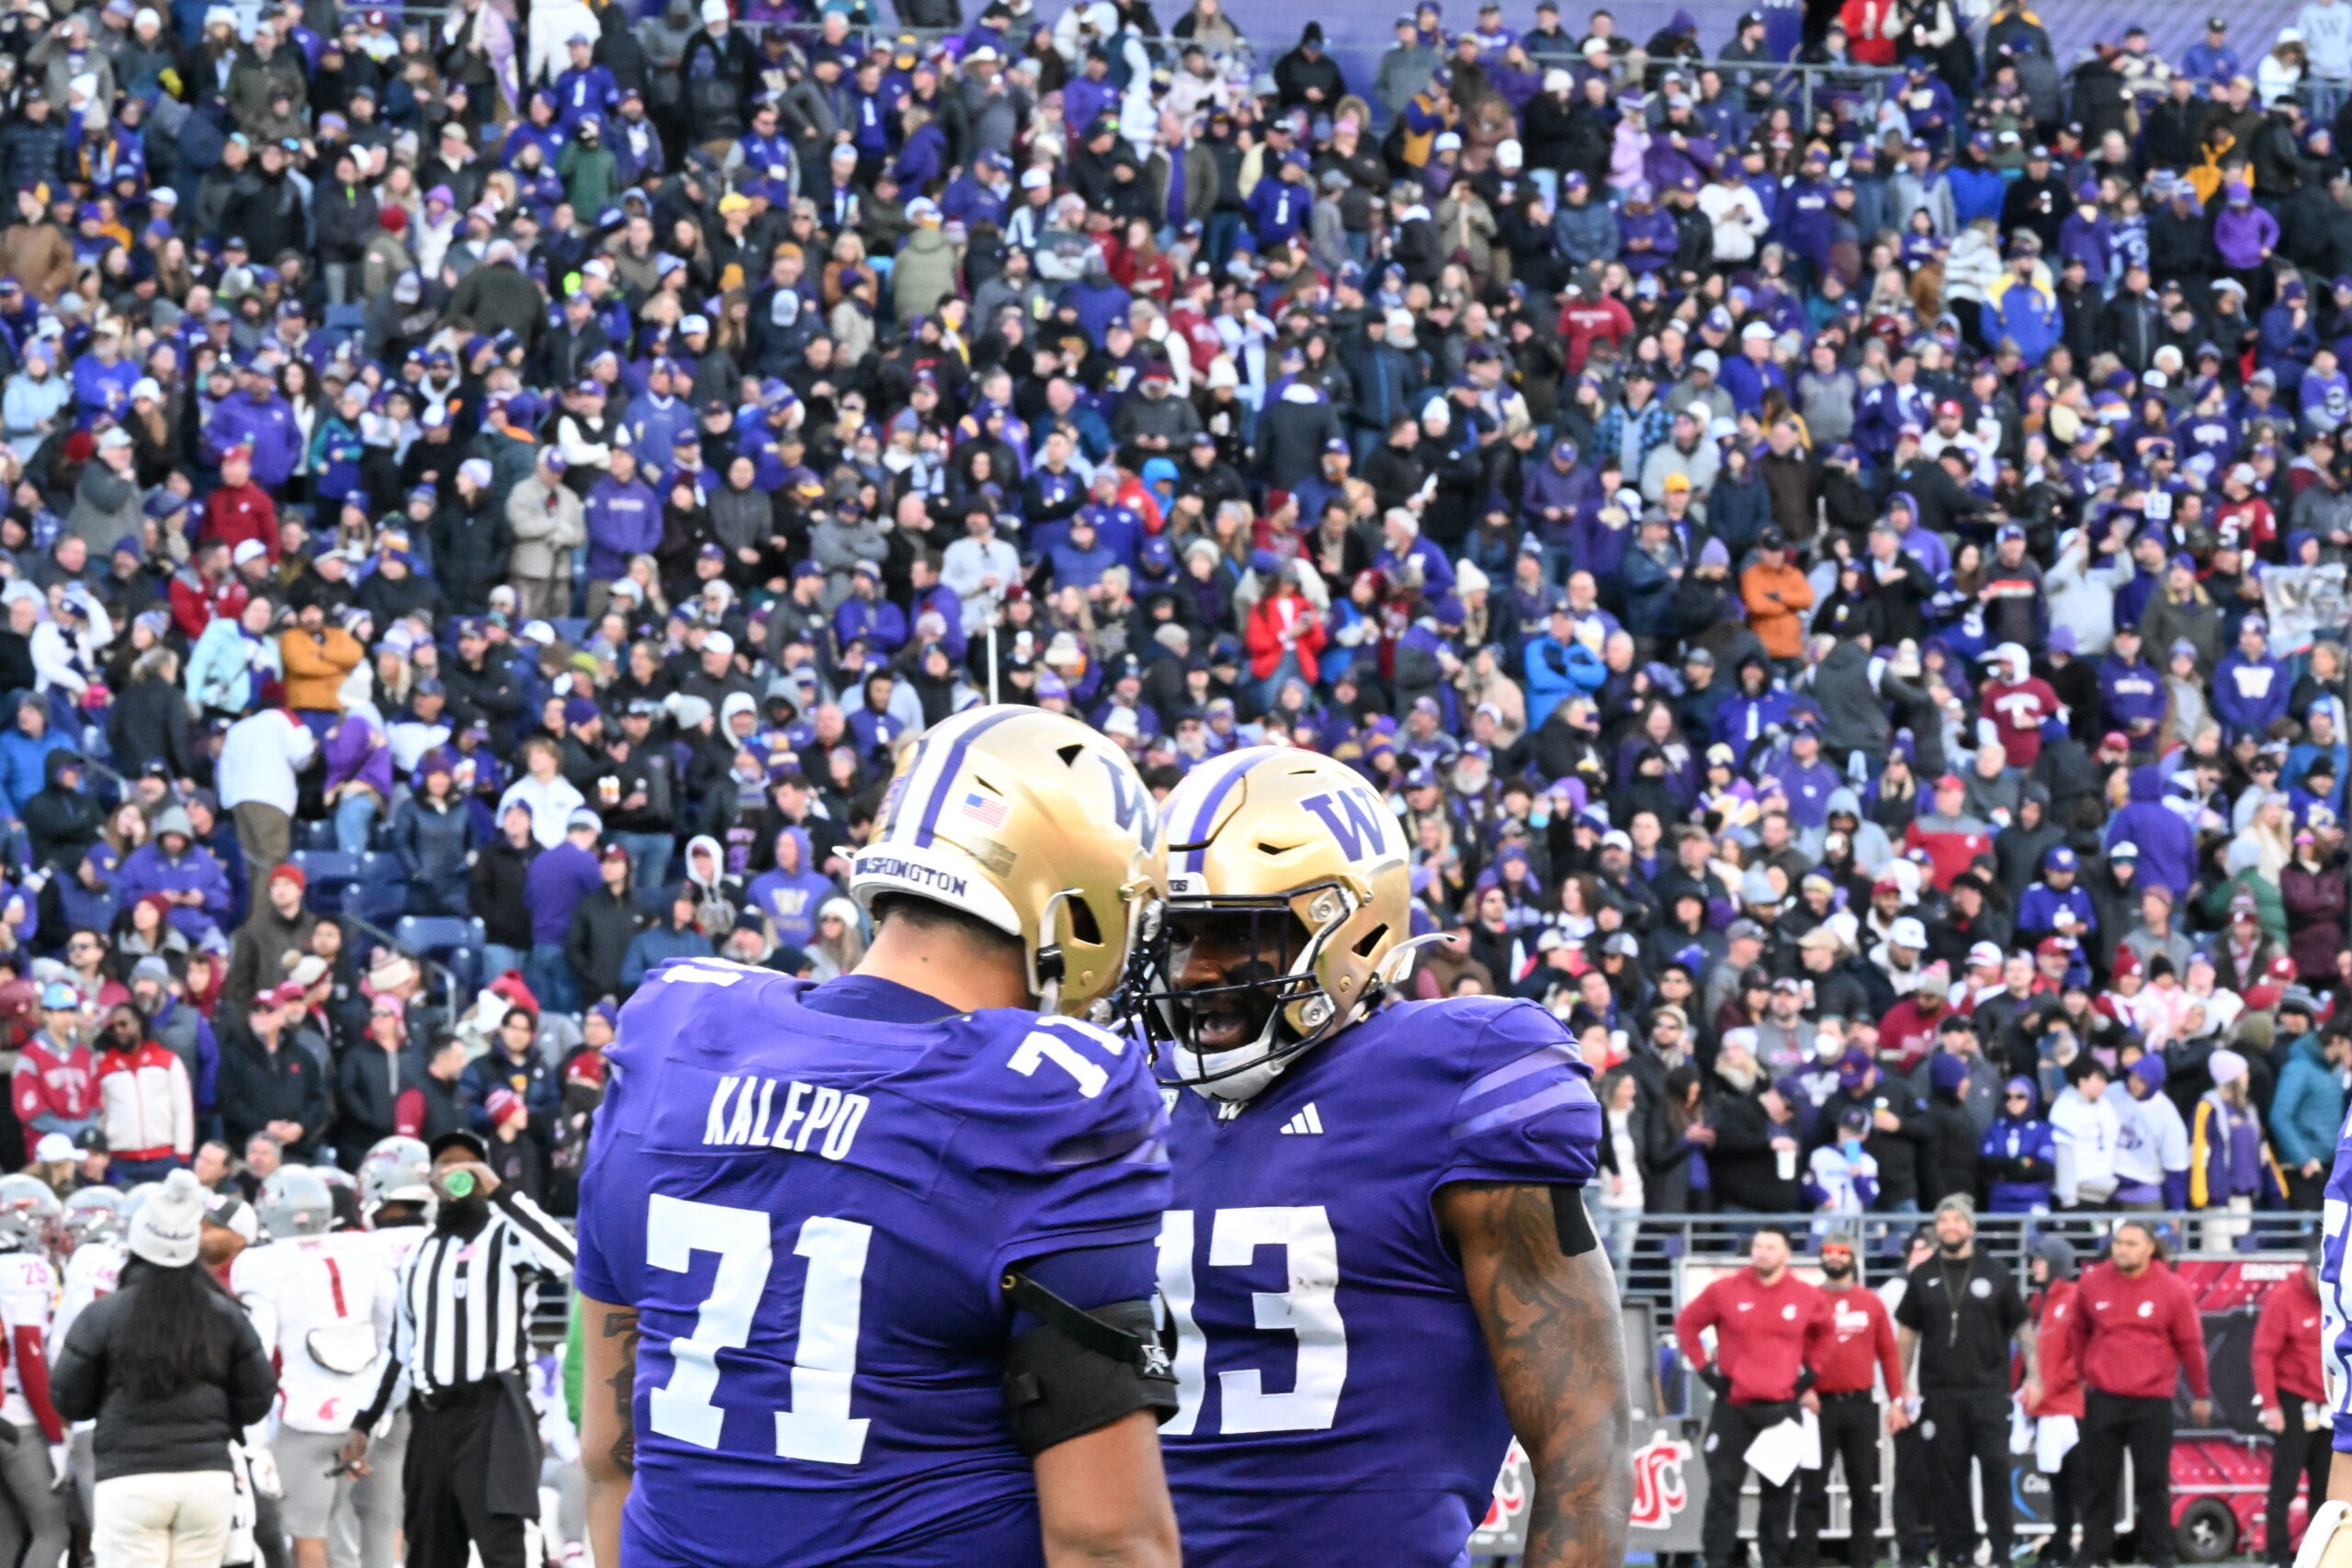 Grading the Game: Washington's Offense Does Just Enough For All the Apples  – Realdawg.com